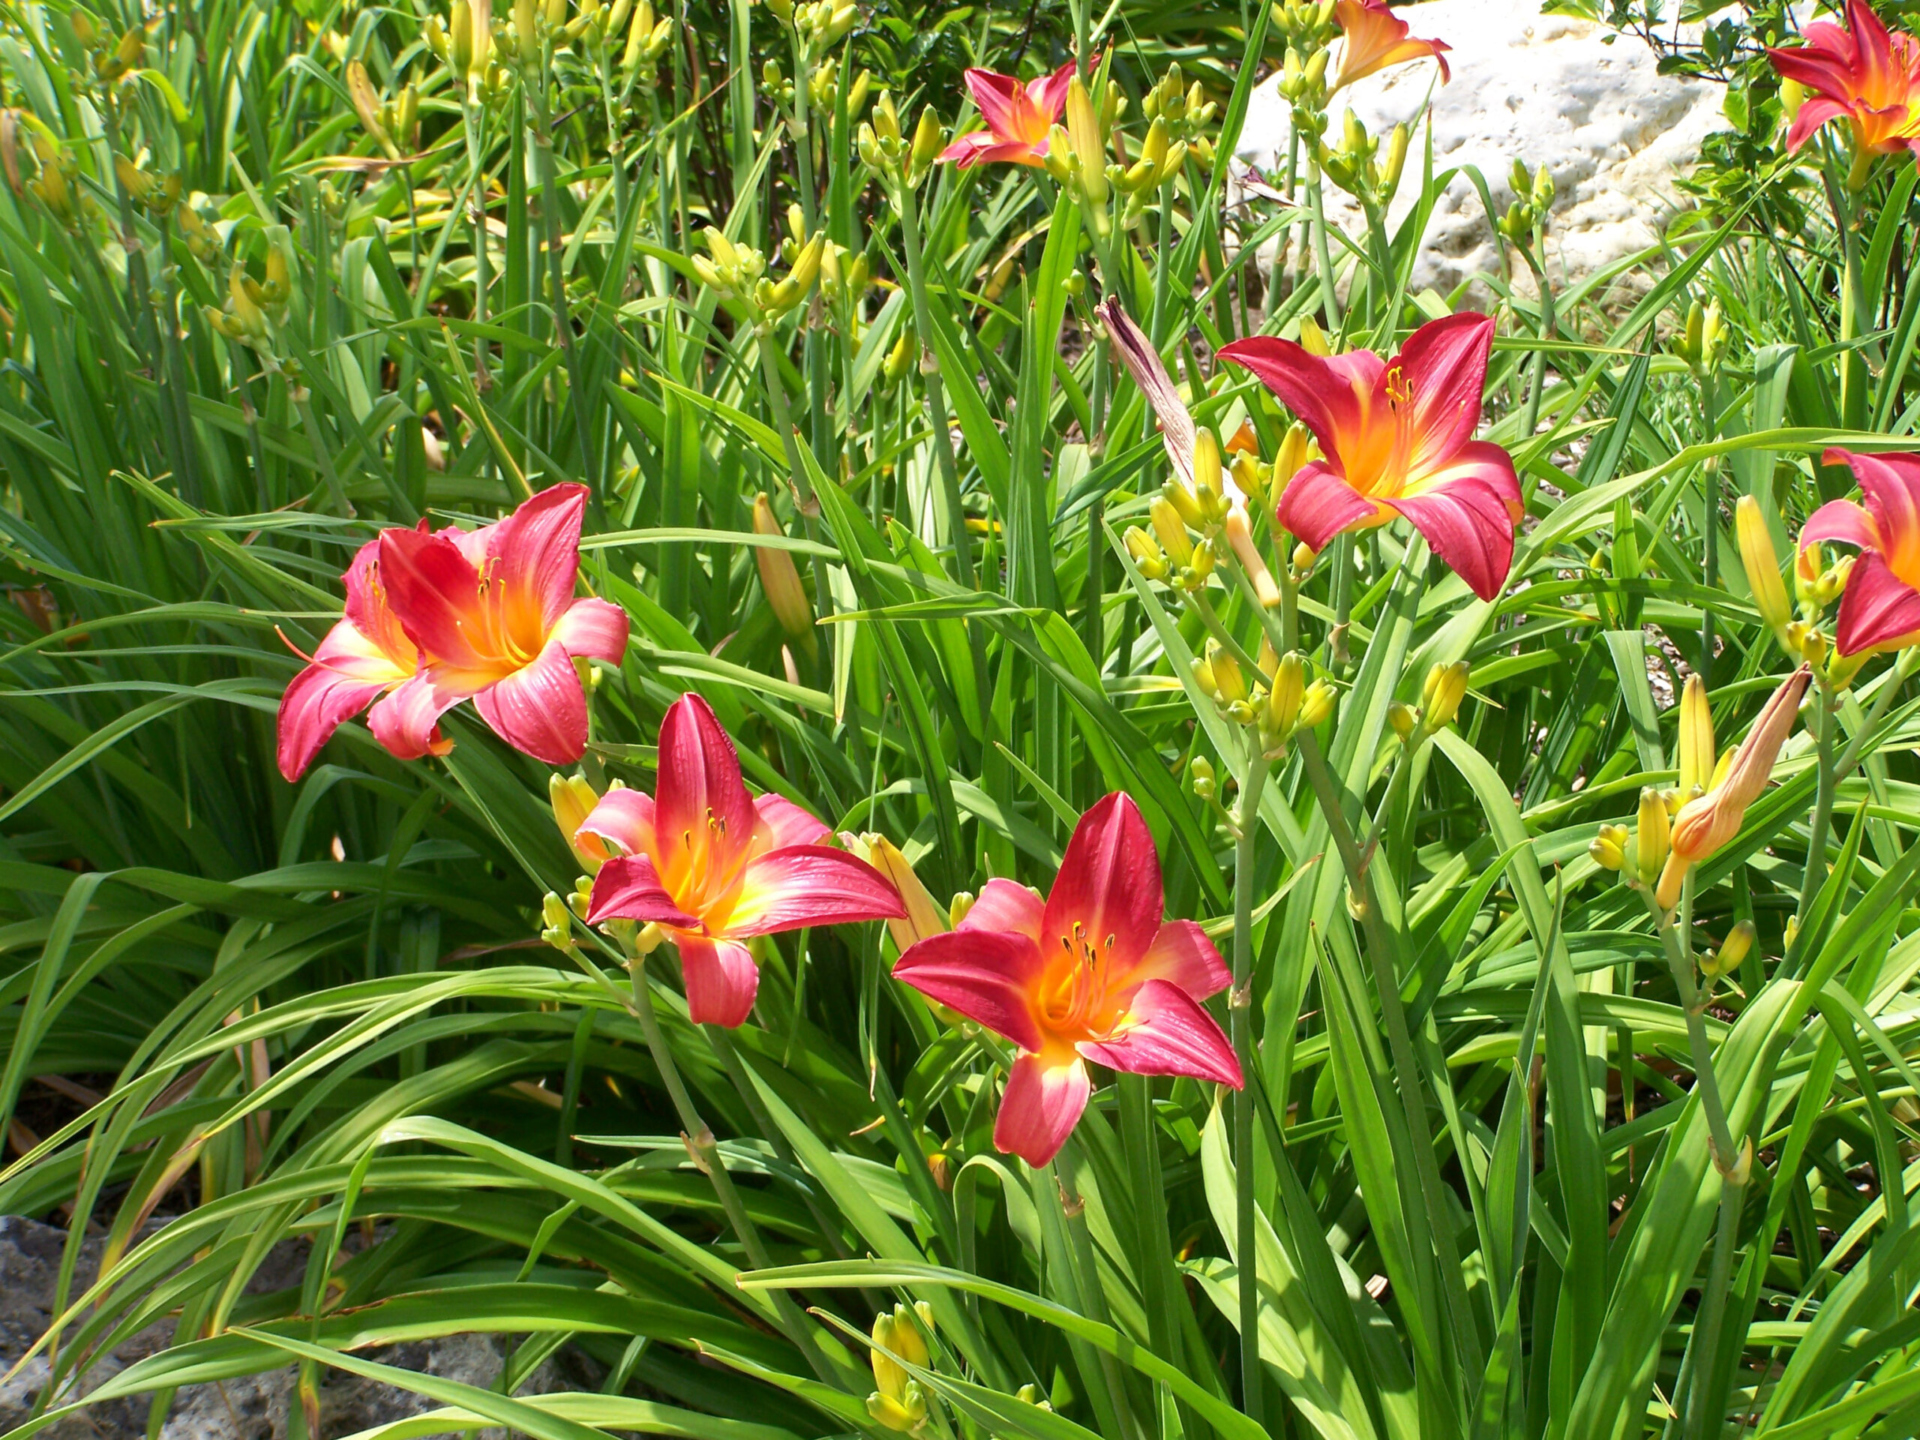 Daylilies in a garden bed.